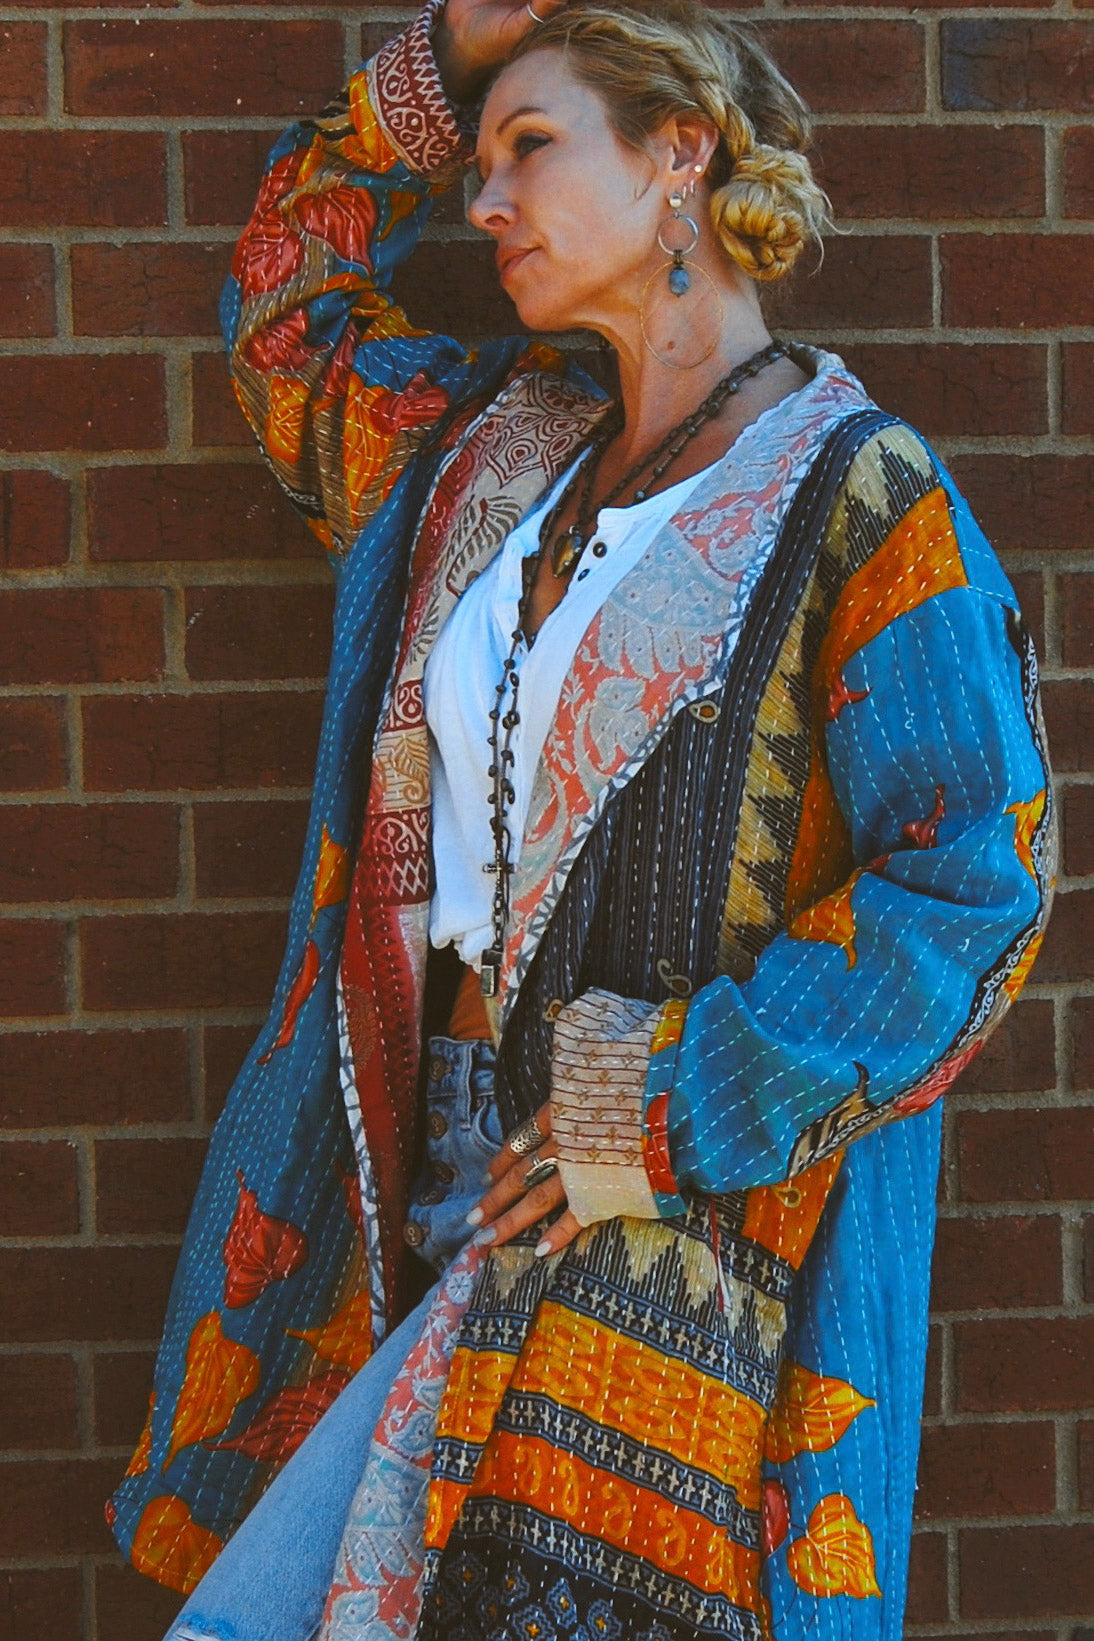 The Dahlia Patchwork Jacket in Lush - SpiritedBoutiques Boho Hippie Boutique Style Jacket, The Roots